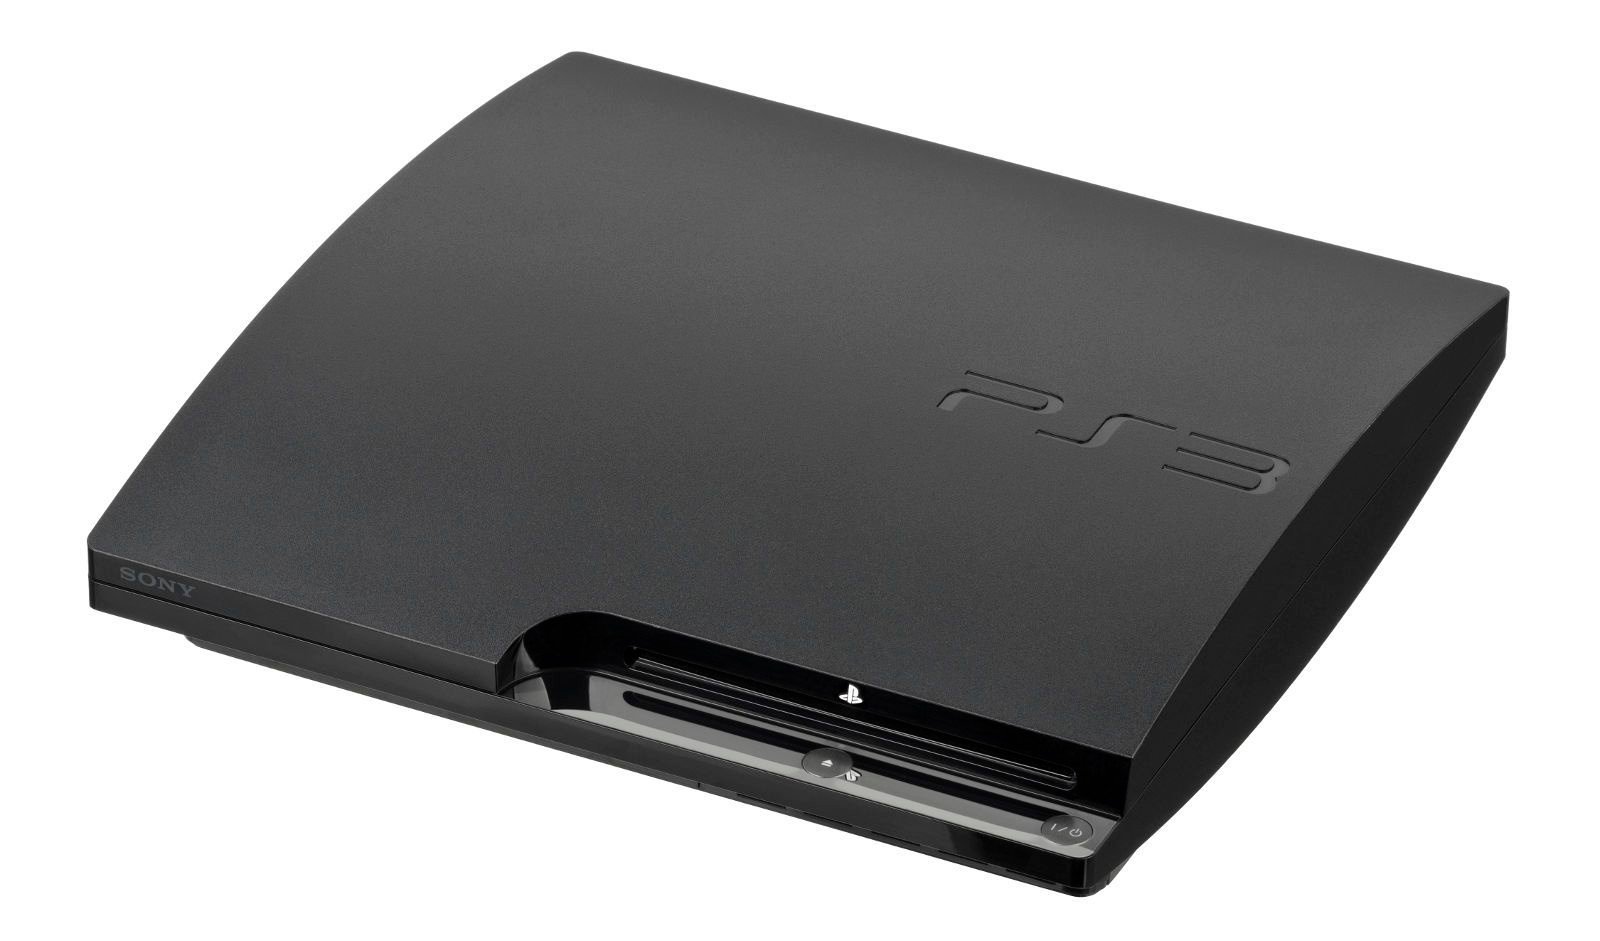 Samenstelling Standaard abces PS3 Firmware Update 4.87 Is Out, Here Are The Details